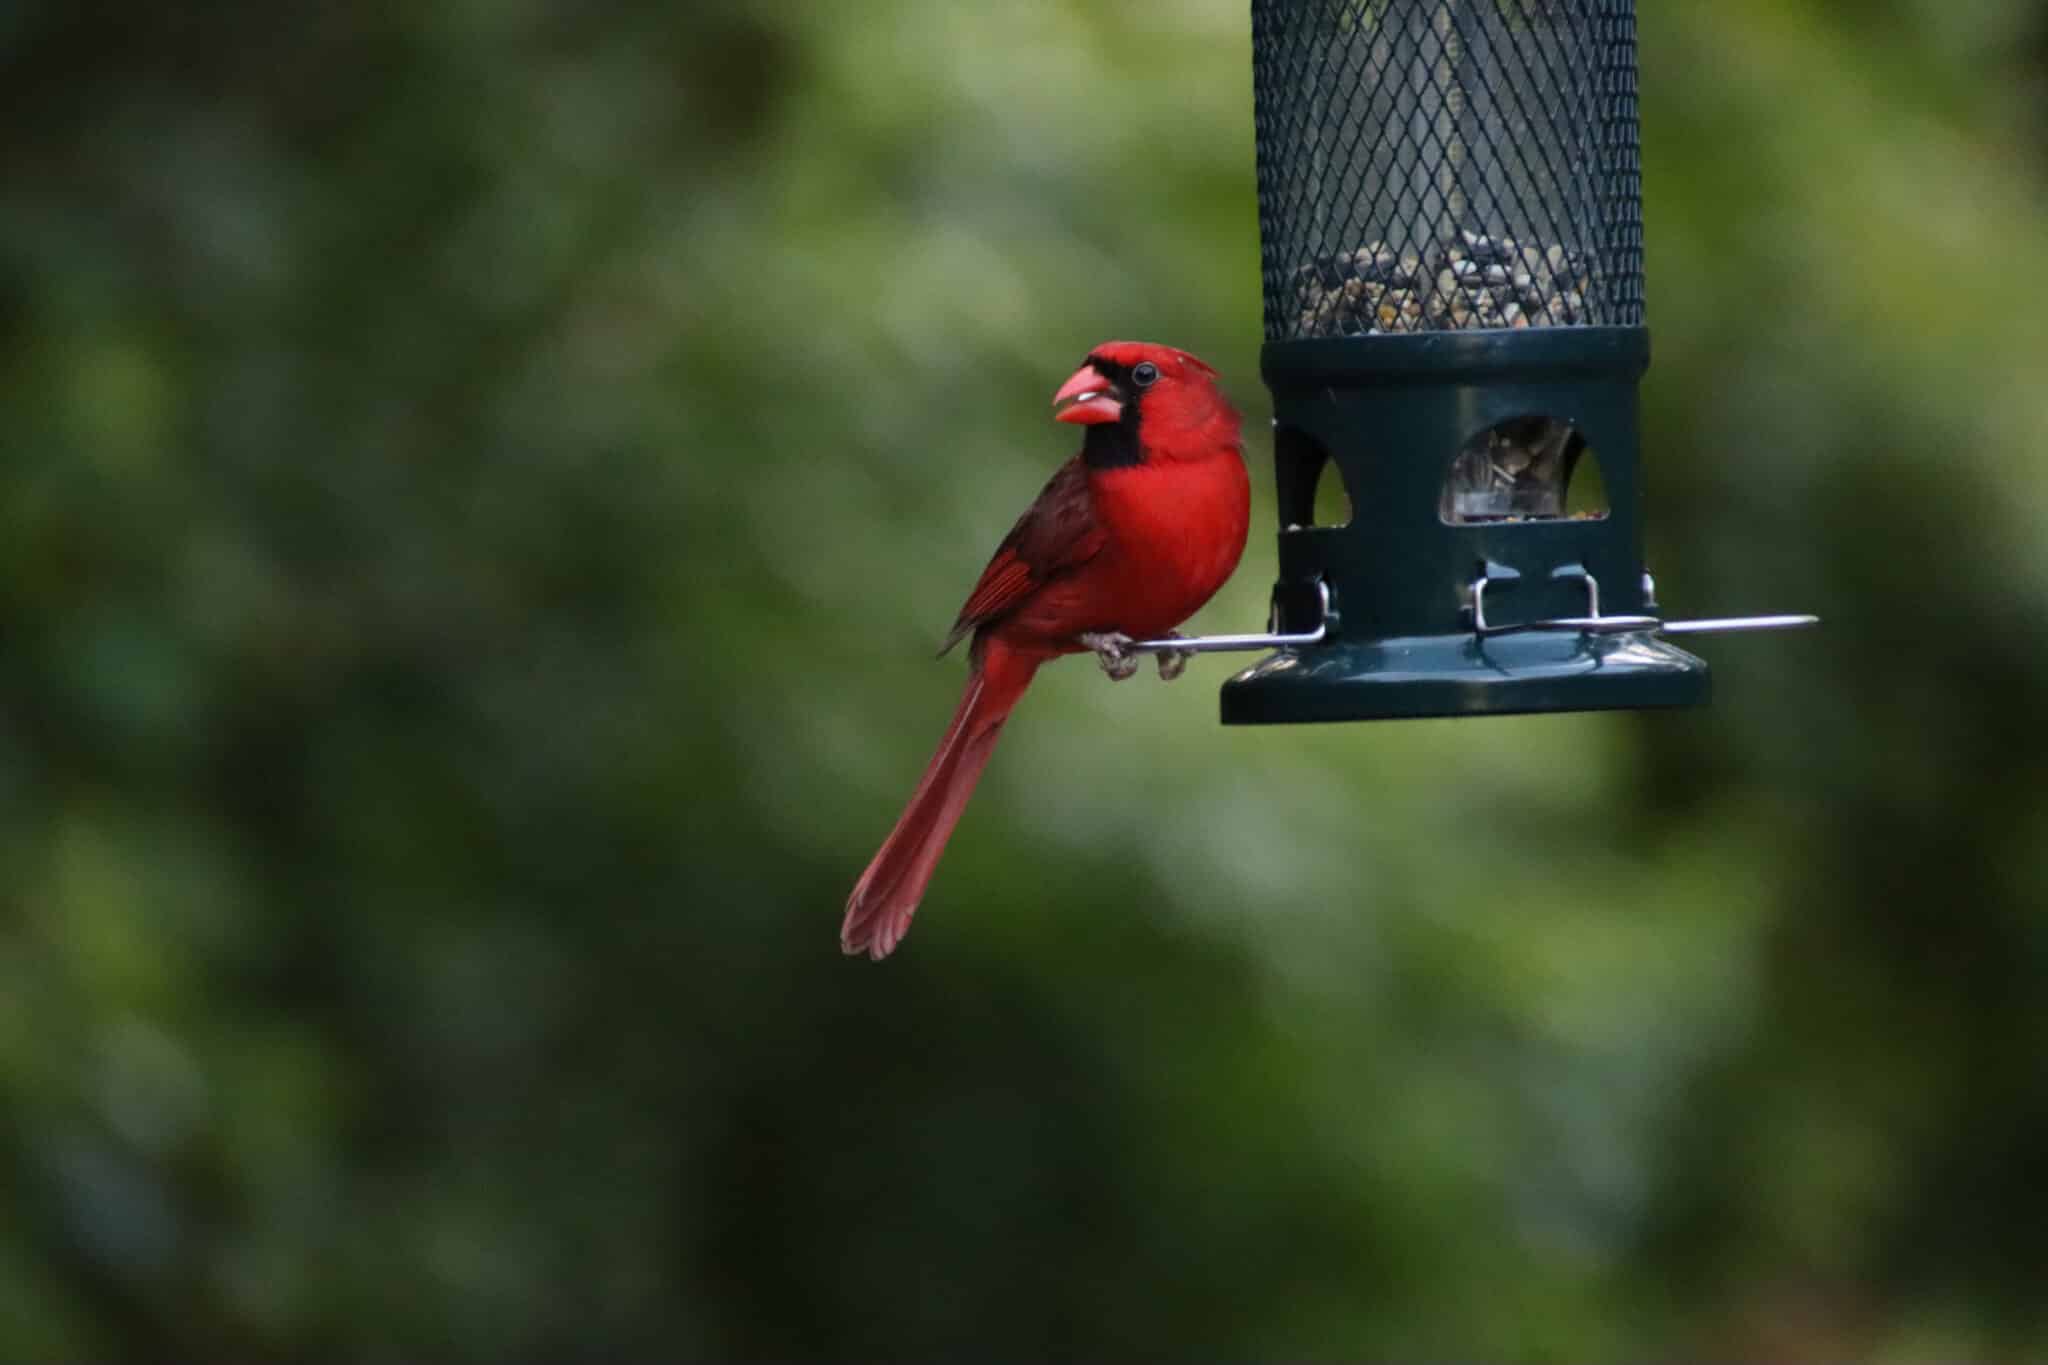 Set Up a Bird Watching Camera in Your Yard for Wildlife Fun